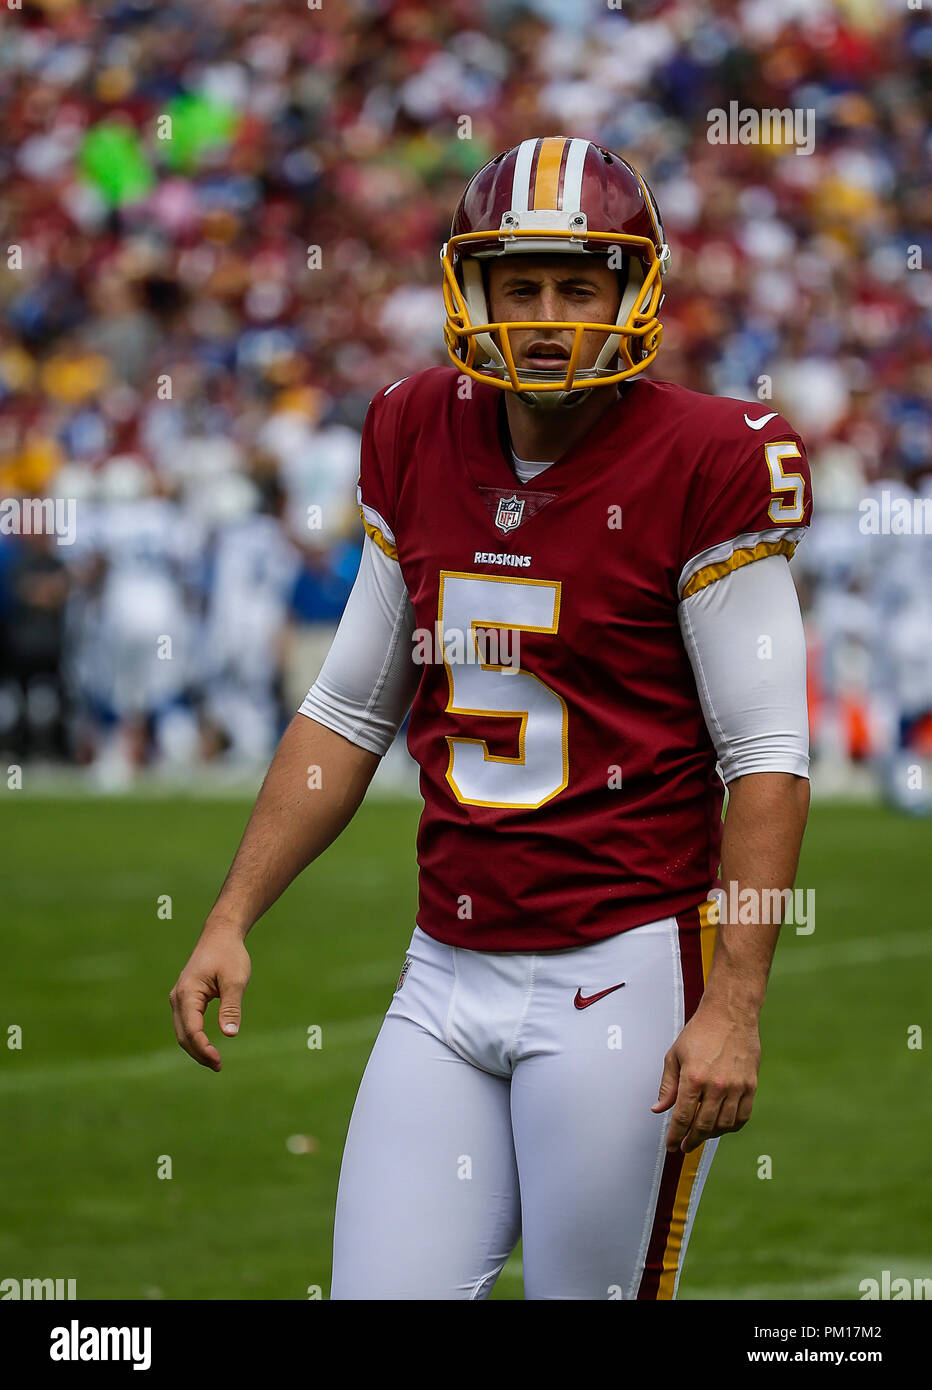 Landover, MD, USA. 16th Sep, 2018. Washington Redskins P #5 Tress Way during a NFL football game between the Washington Redskins and the Indianapolis Colts at FedEx Field in Landover, MD. Justin Cooper/CSM/Alamy Live News Stock Photo